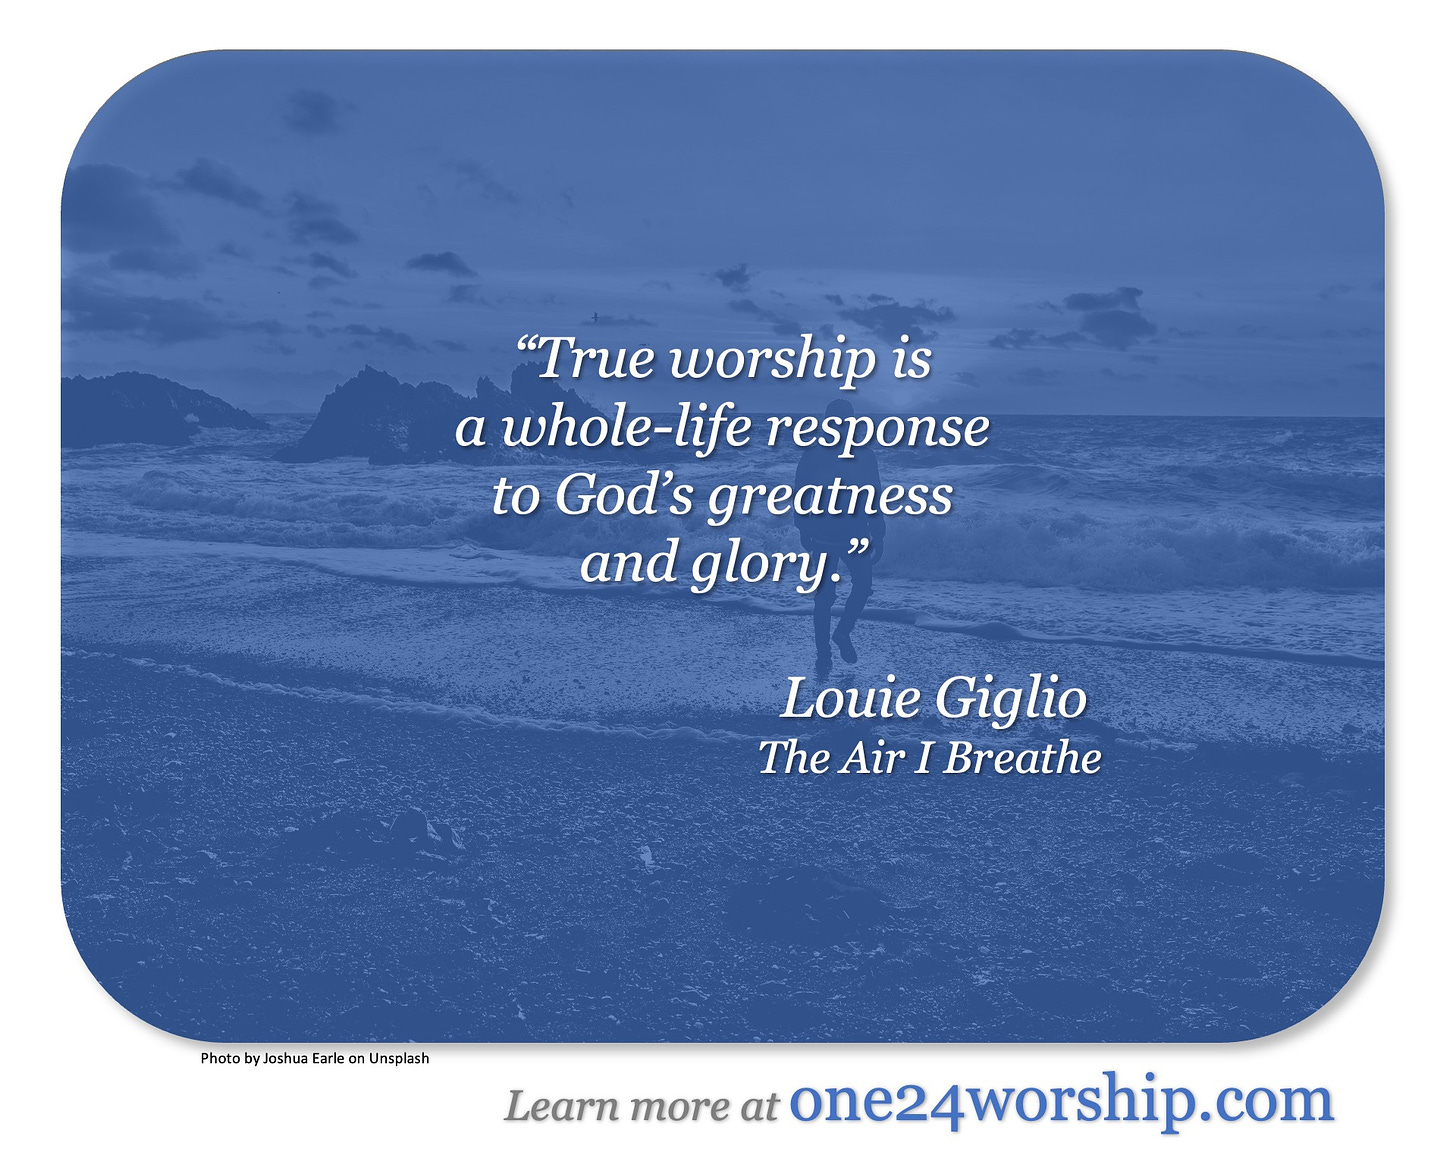 Image of a man walking on a beach at sunrise with a Louie Giglio quote superimposed.